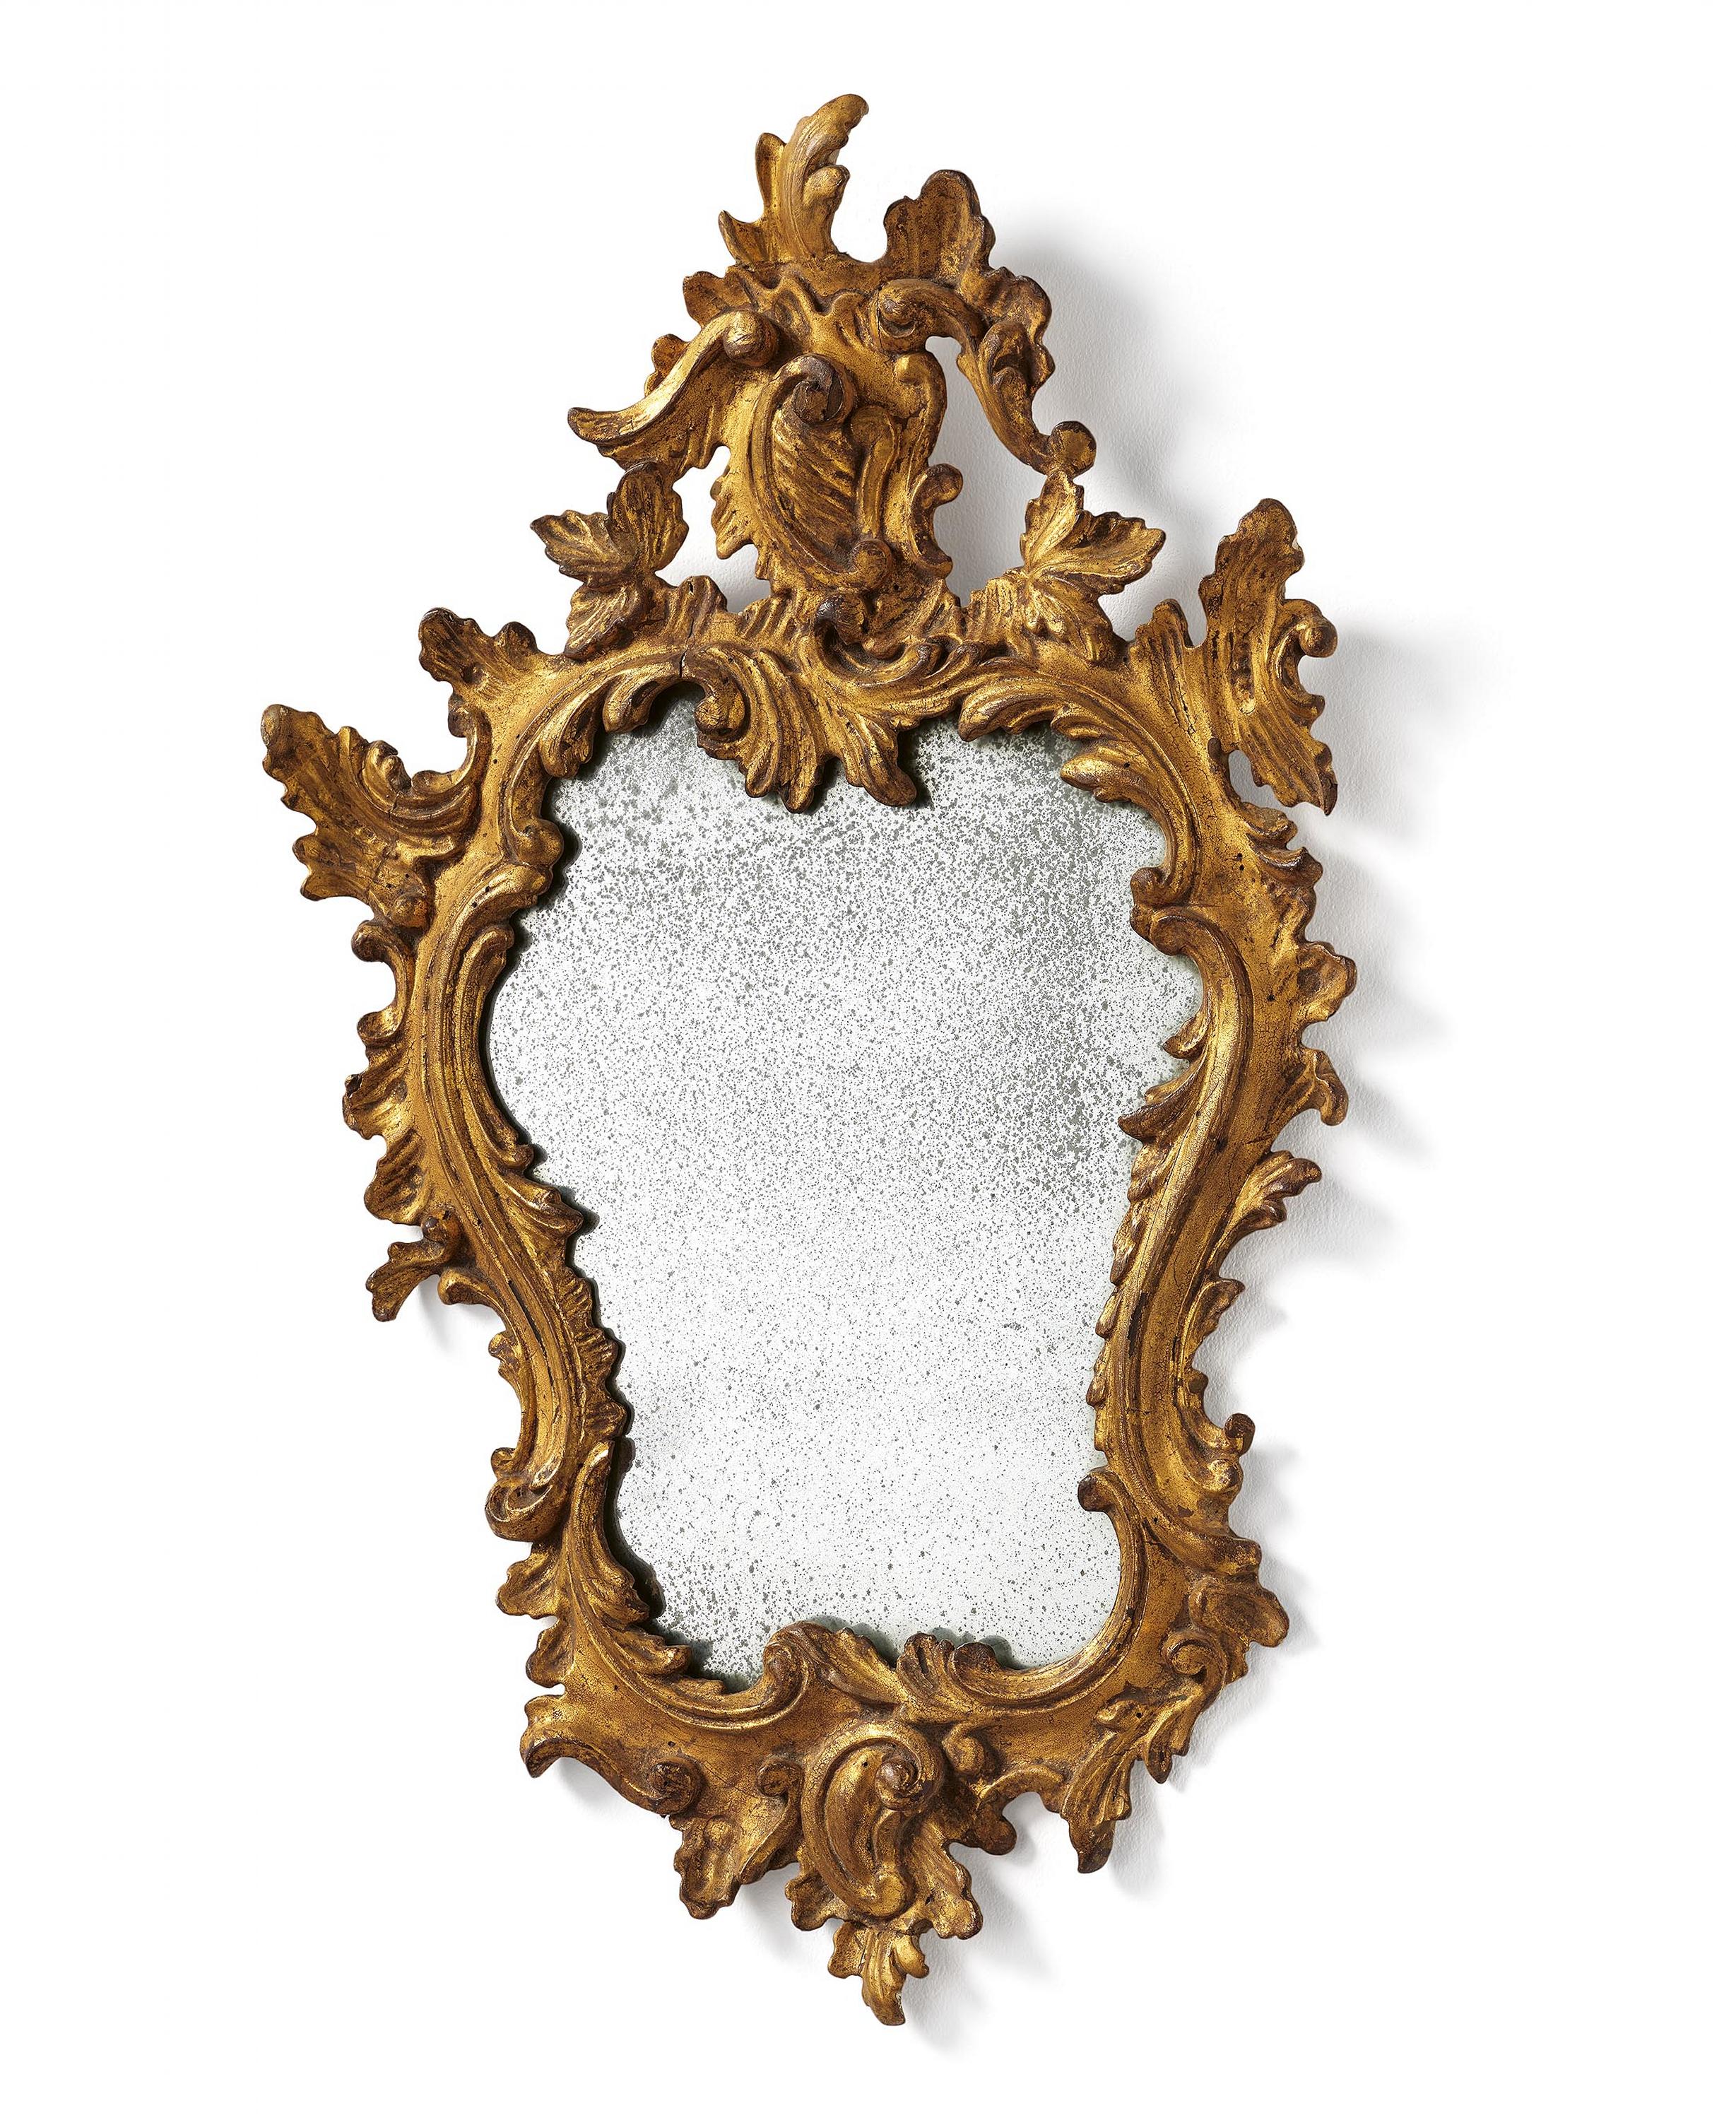 Southern German: CARTOUCHE-SHAPED WOODEN MIRROR